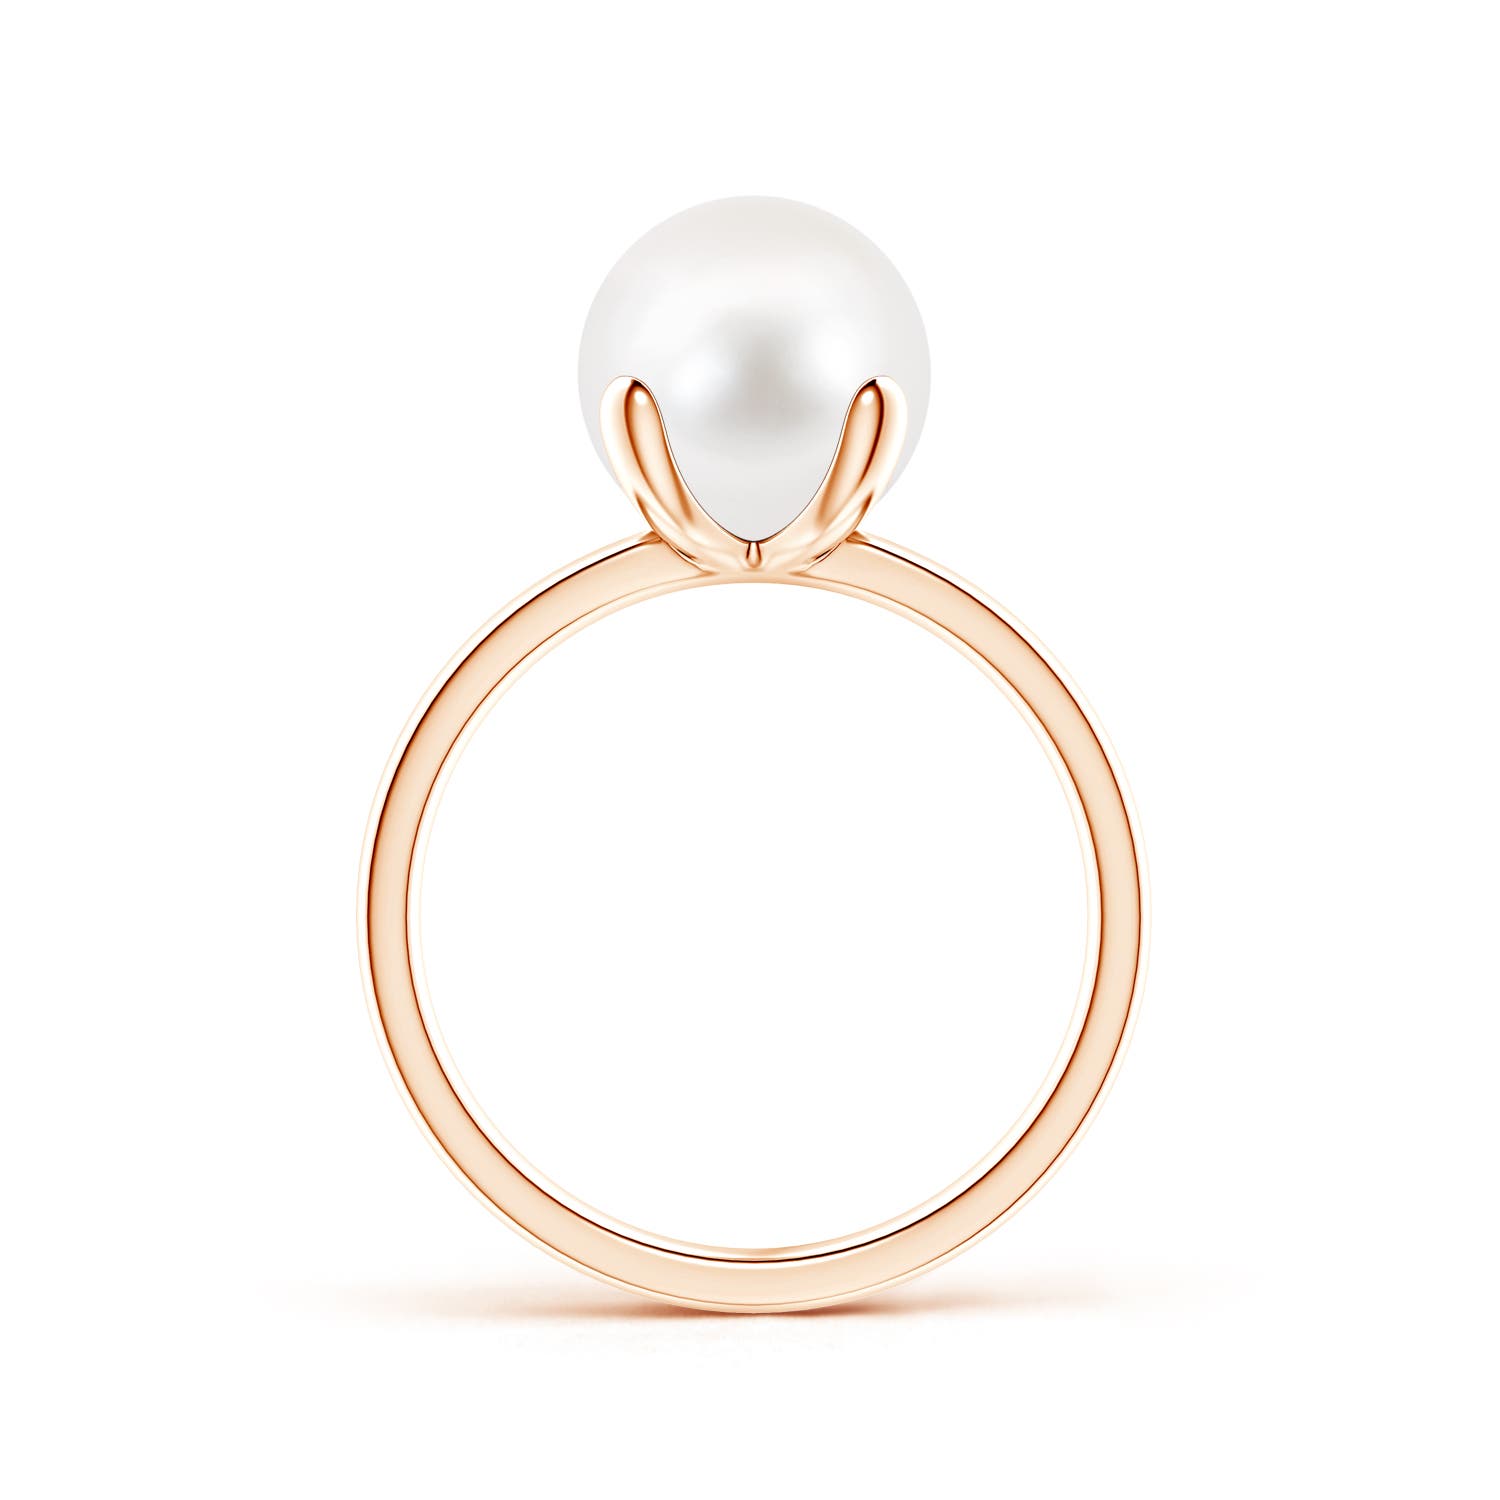 AA / 5.25 CT / 14 KT Rose Gold